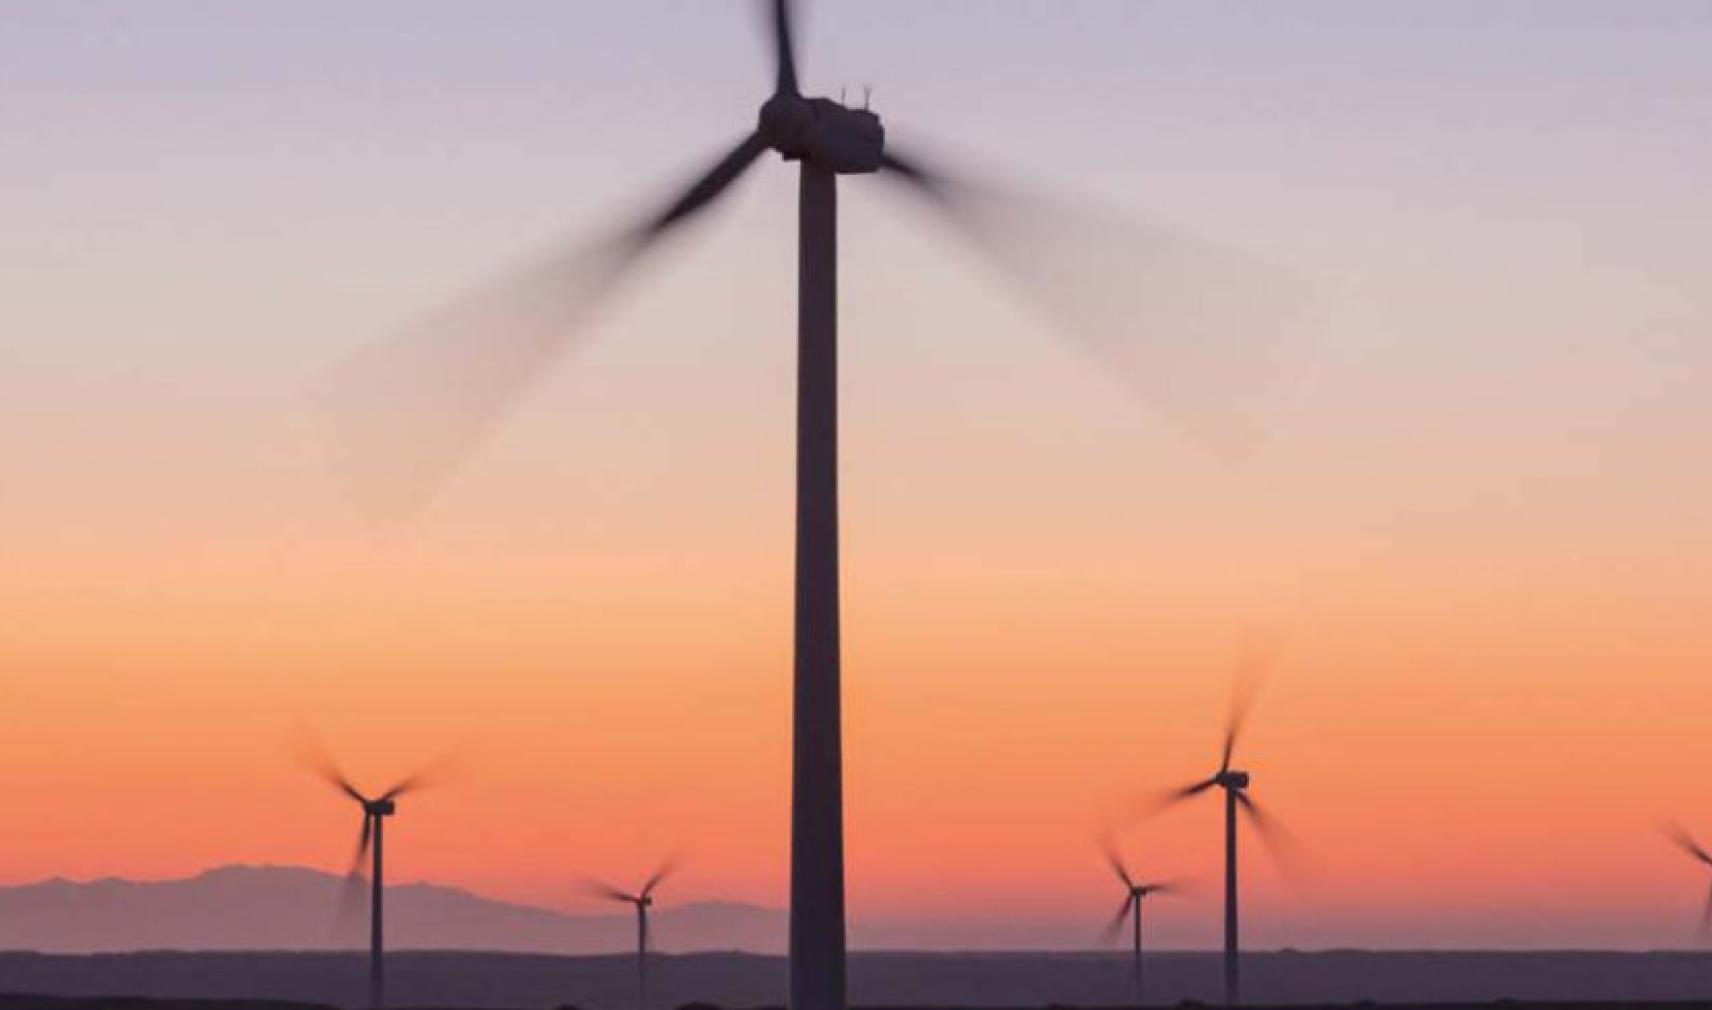 Sensors can make the management of wind turbines into an automated process that increases their efficiency